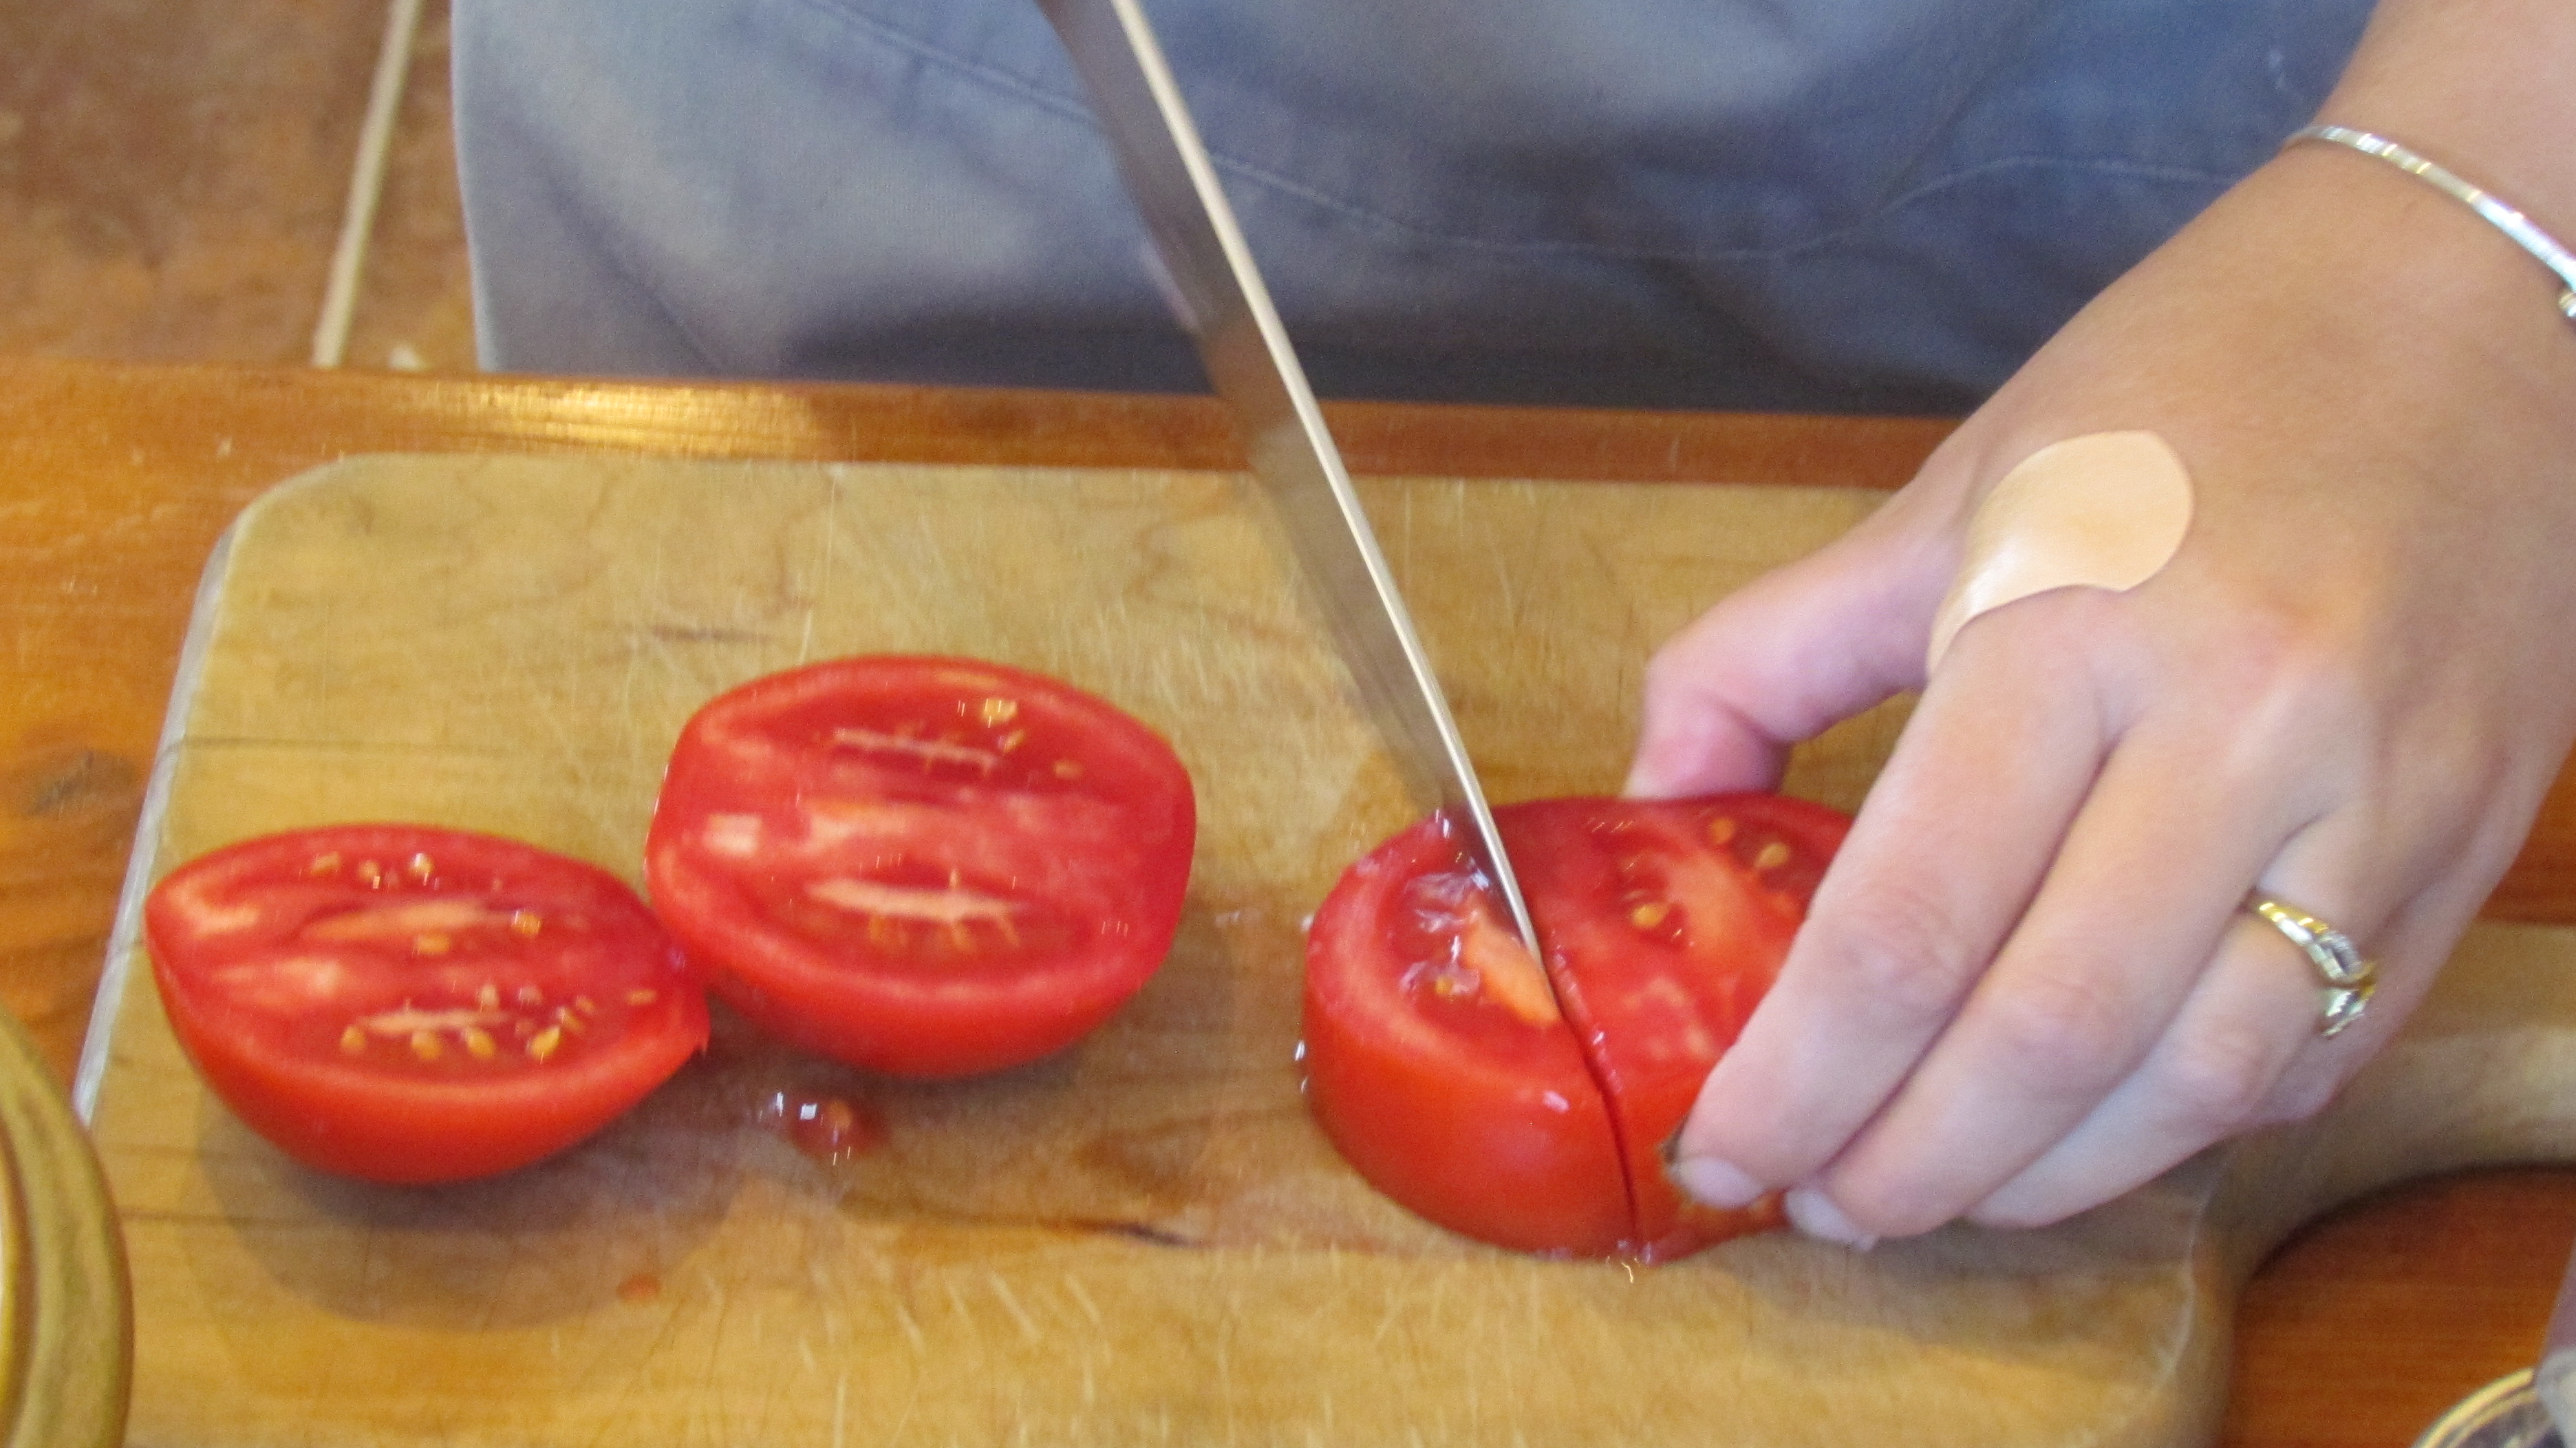 Morgan prepping a tomato for the digaag qumbe